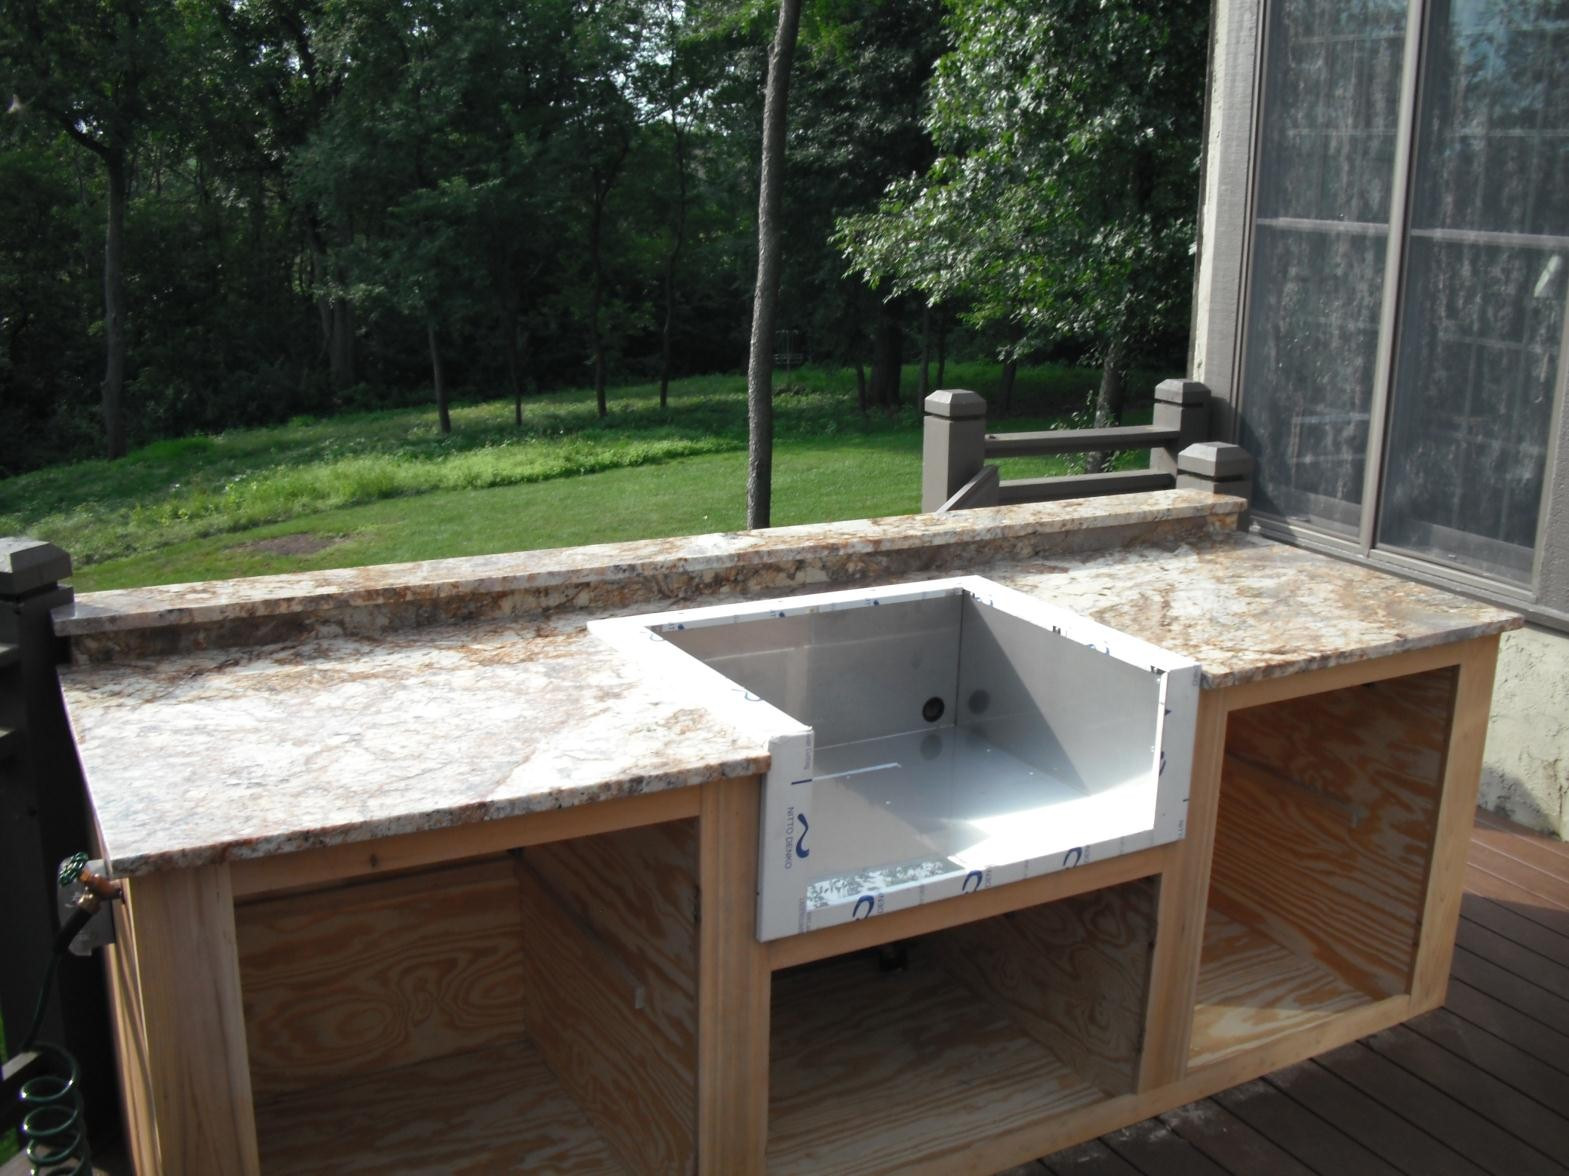 Outdoor Kitchen Cabinet Plans
 How to Build Outdoor Kitchen Cabinets AllstateLogHomes